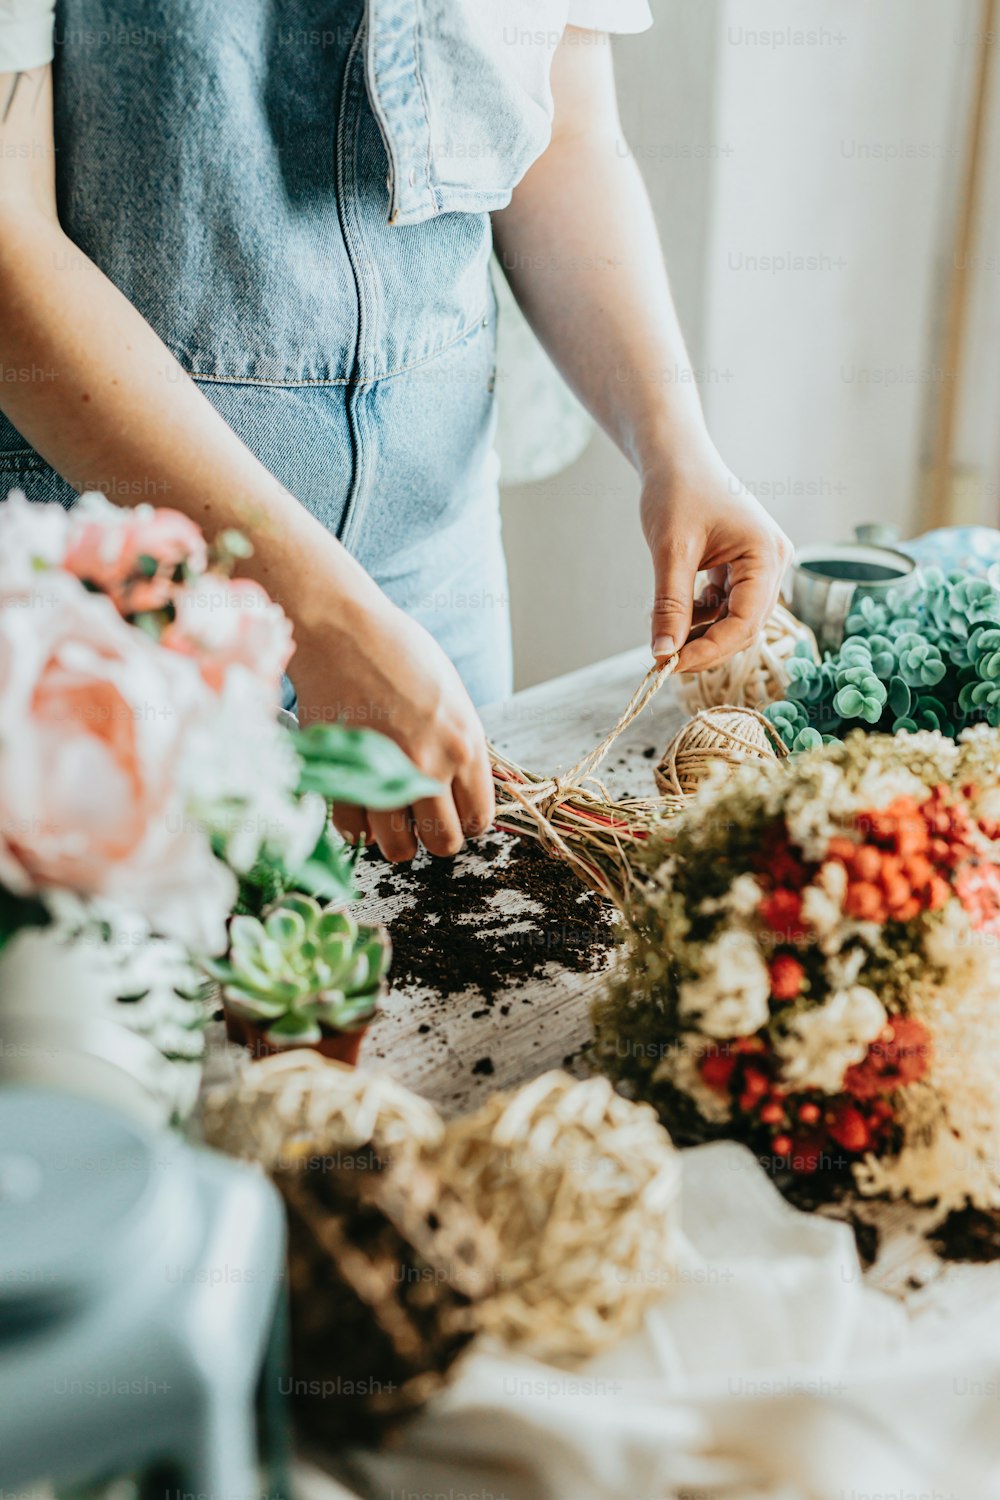 a woman is arranging flowers on a table